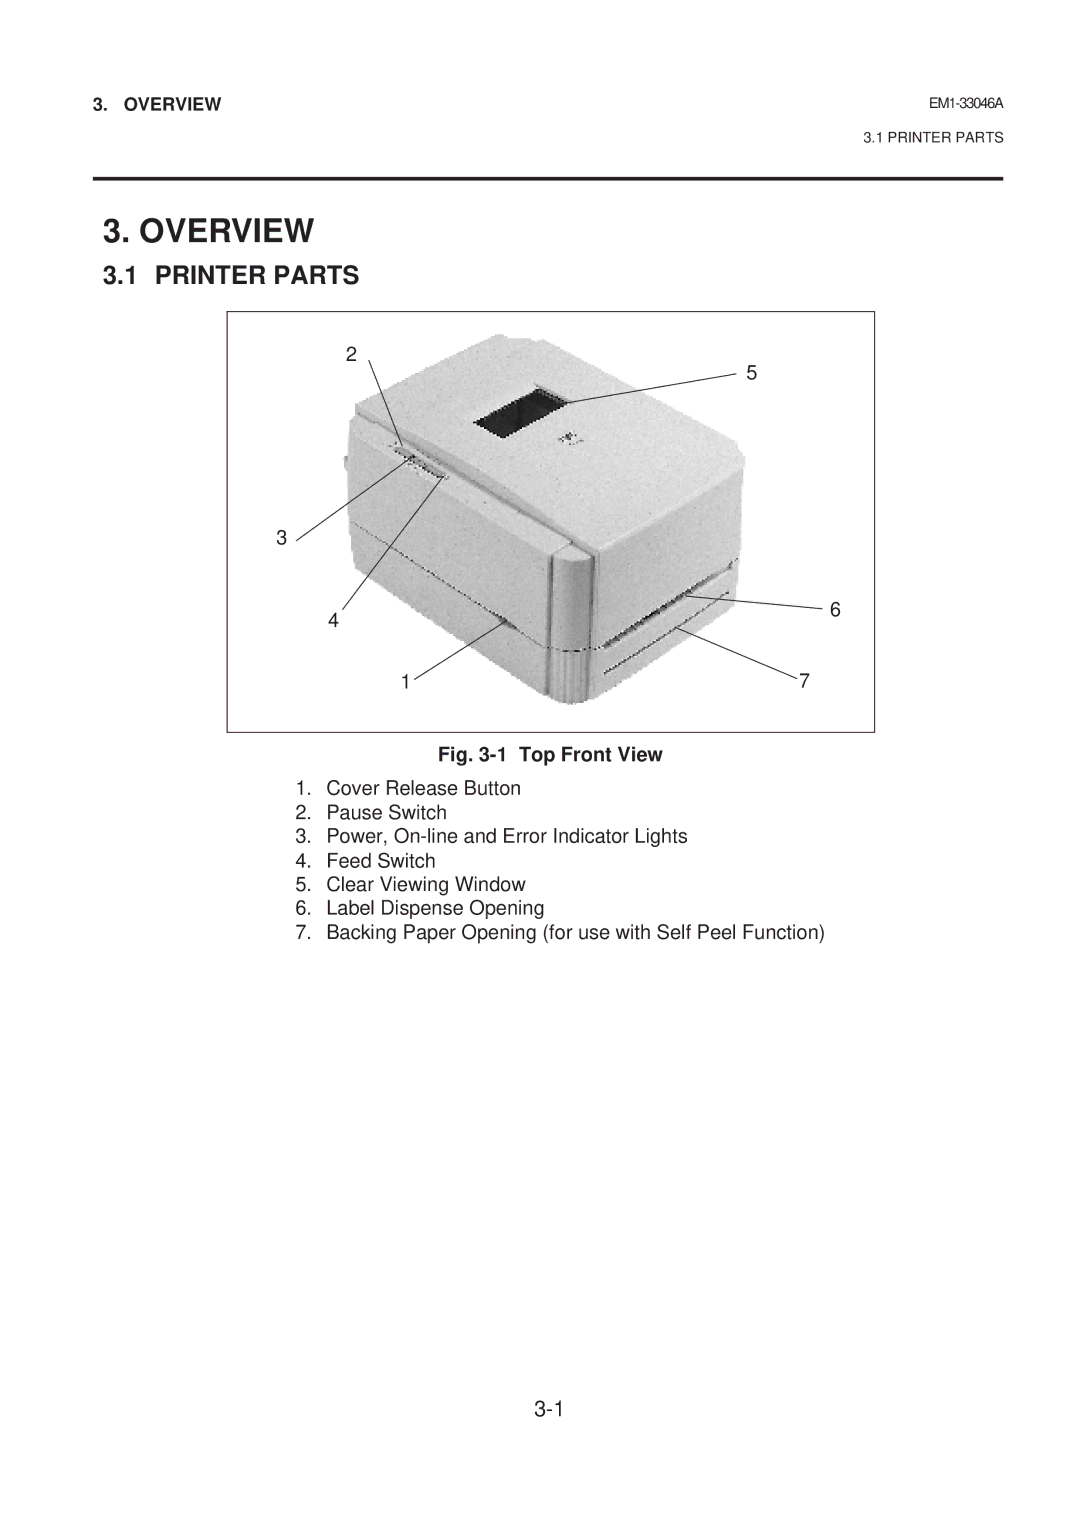 Toshiba EM1-33046AE, B-442-QP owner manual Overview, Printer Parts 